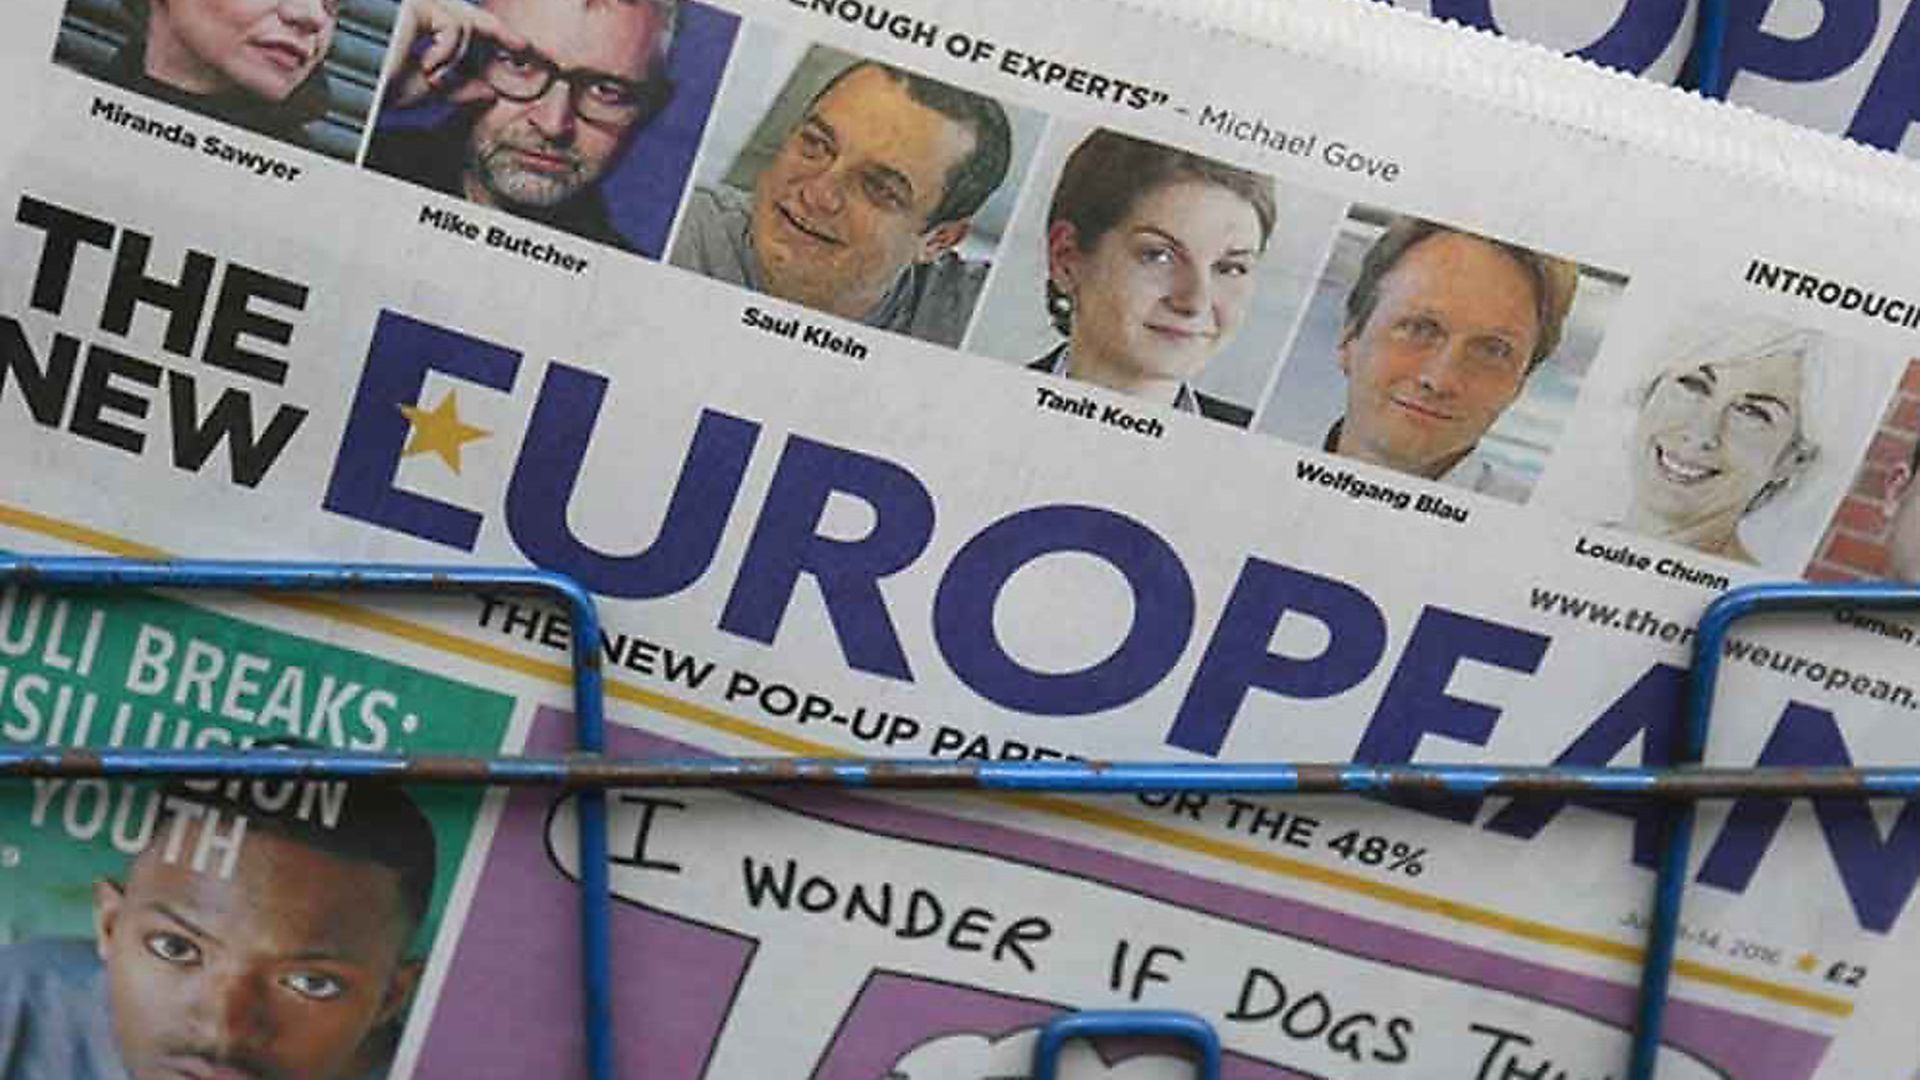 Ньюс евро. Журнал the New European. The New European newspaper. Papers eu 8. European News and Politics bookmaker.